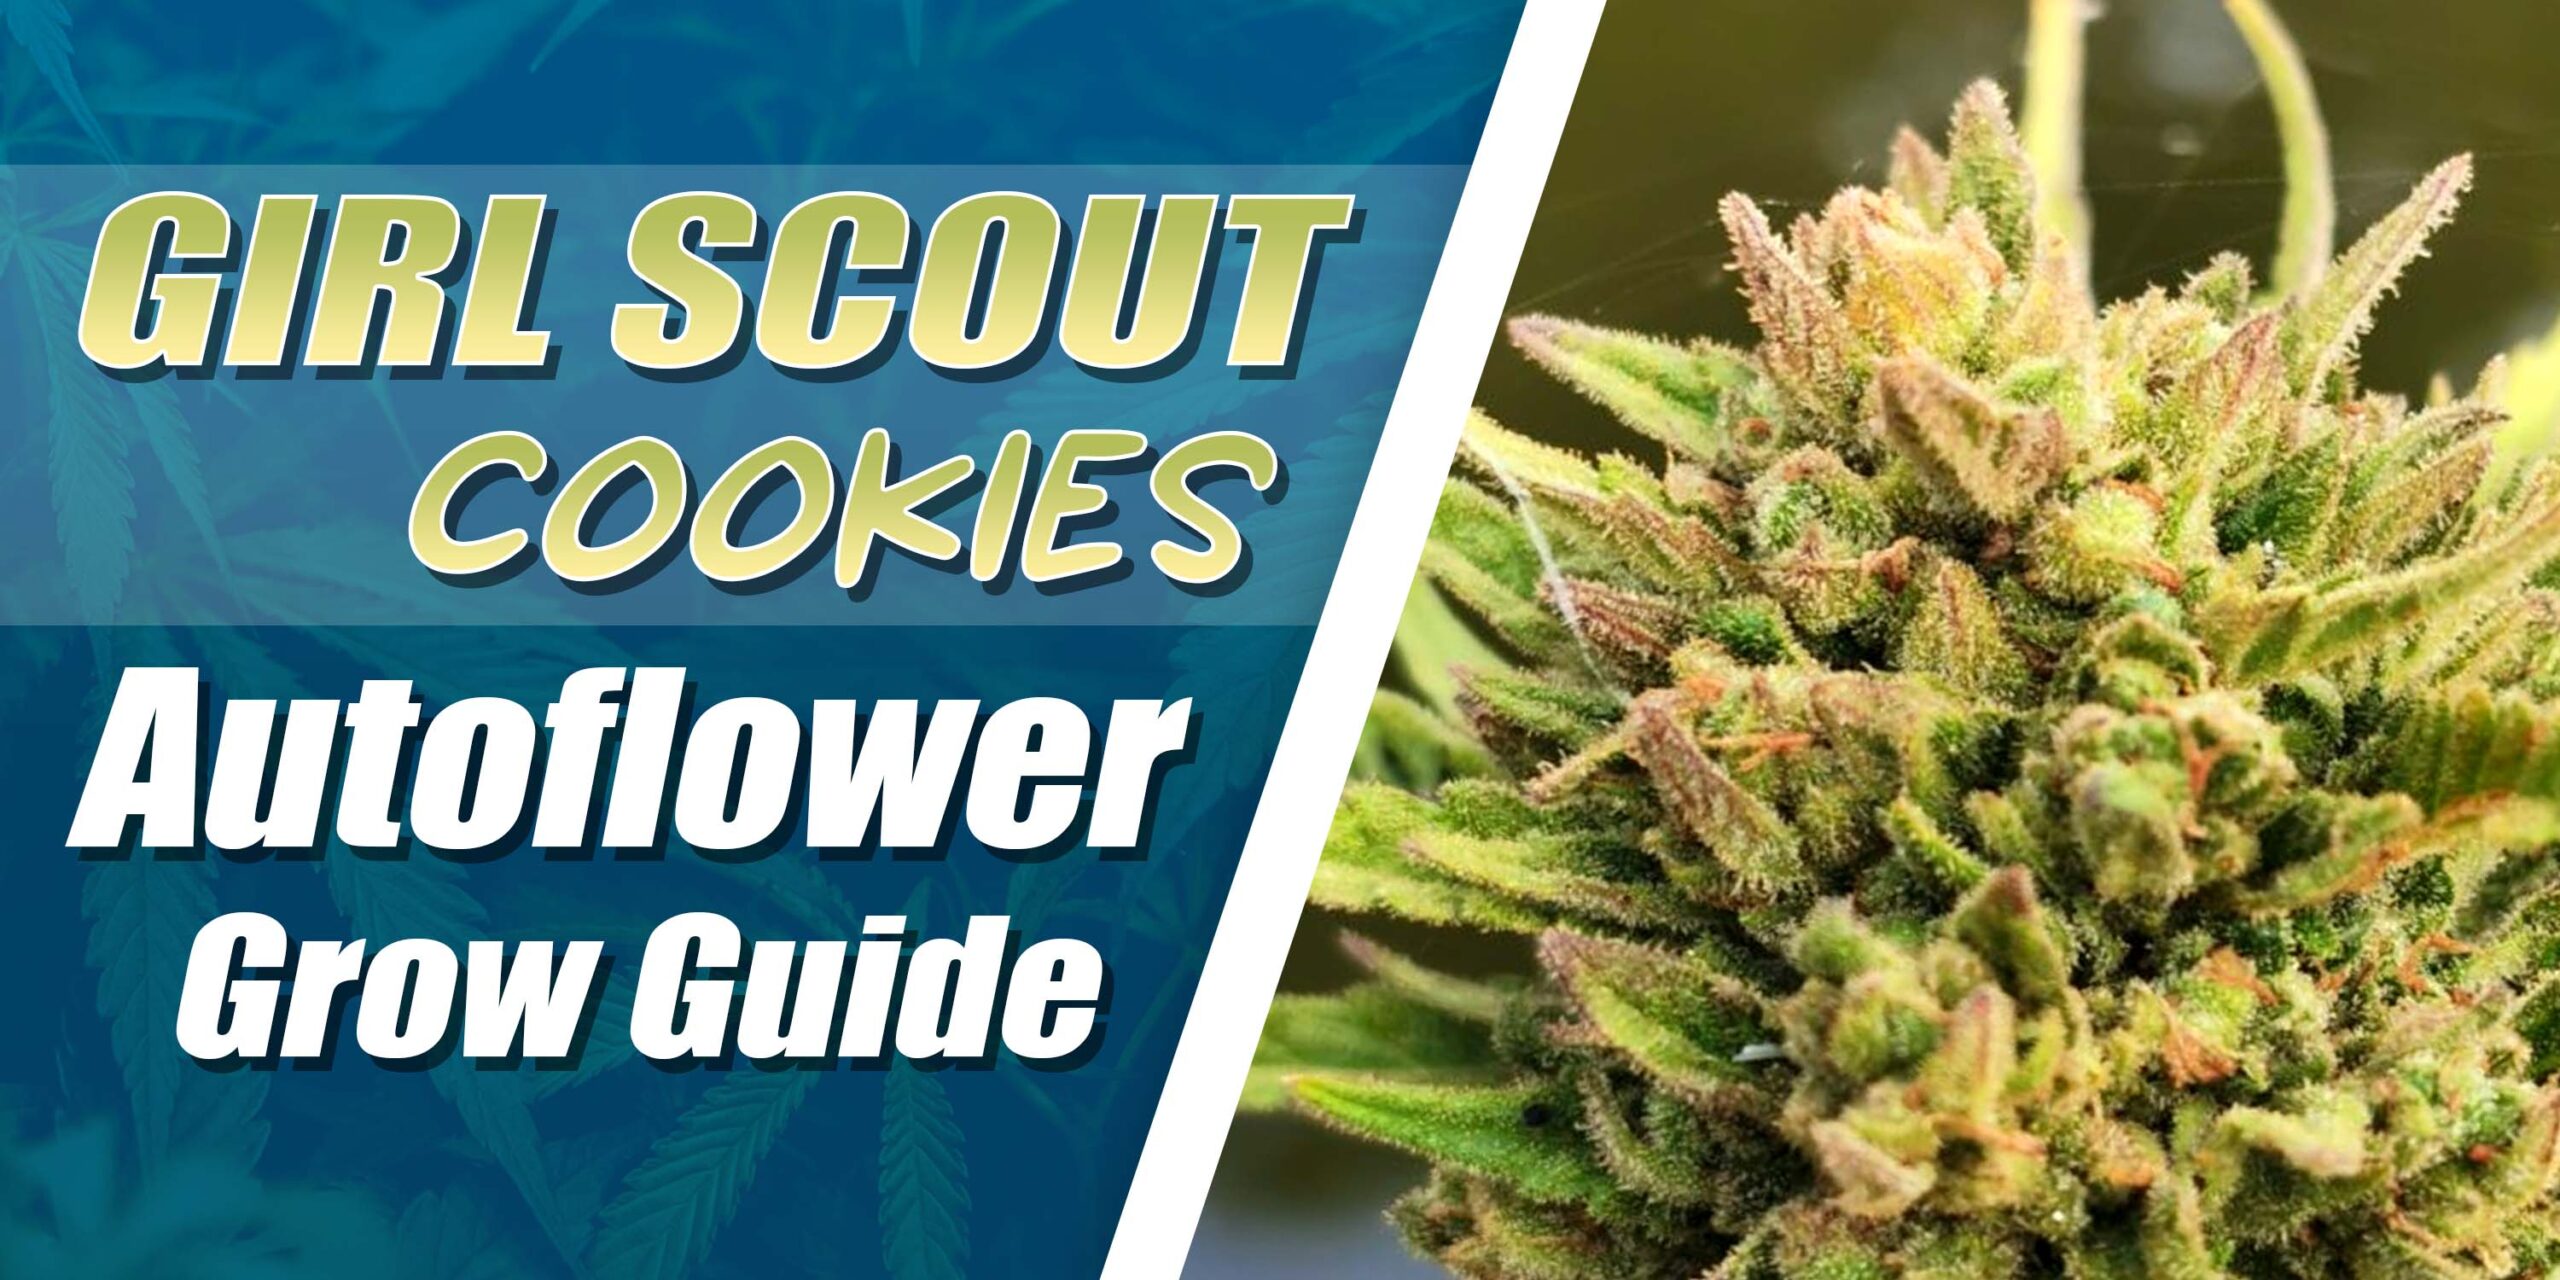 Girl Scout Cookies Autoflower Grow Guide